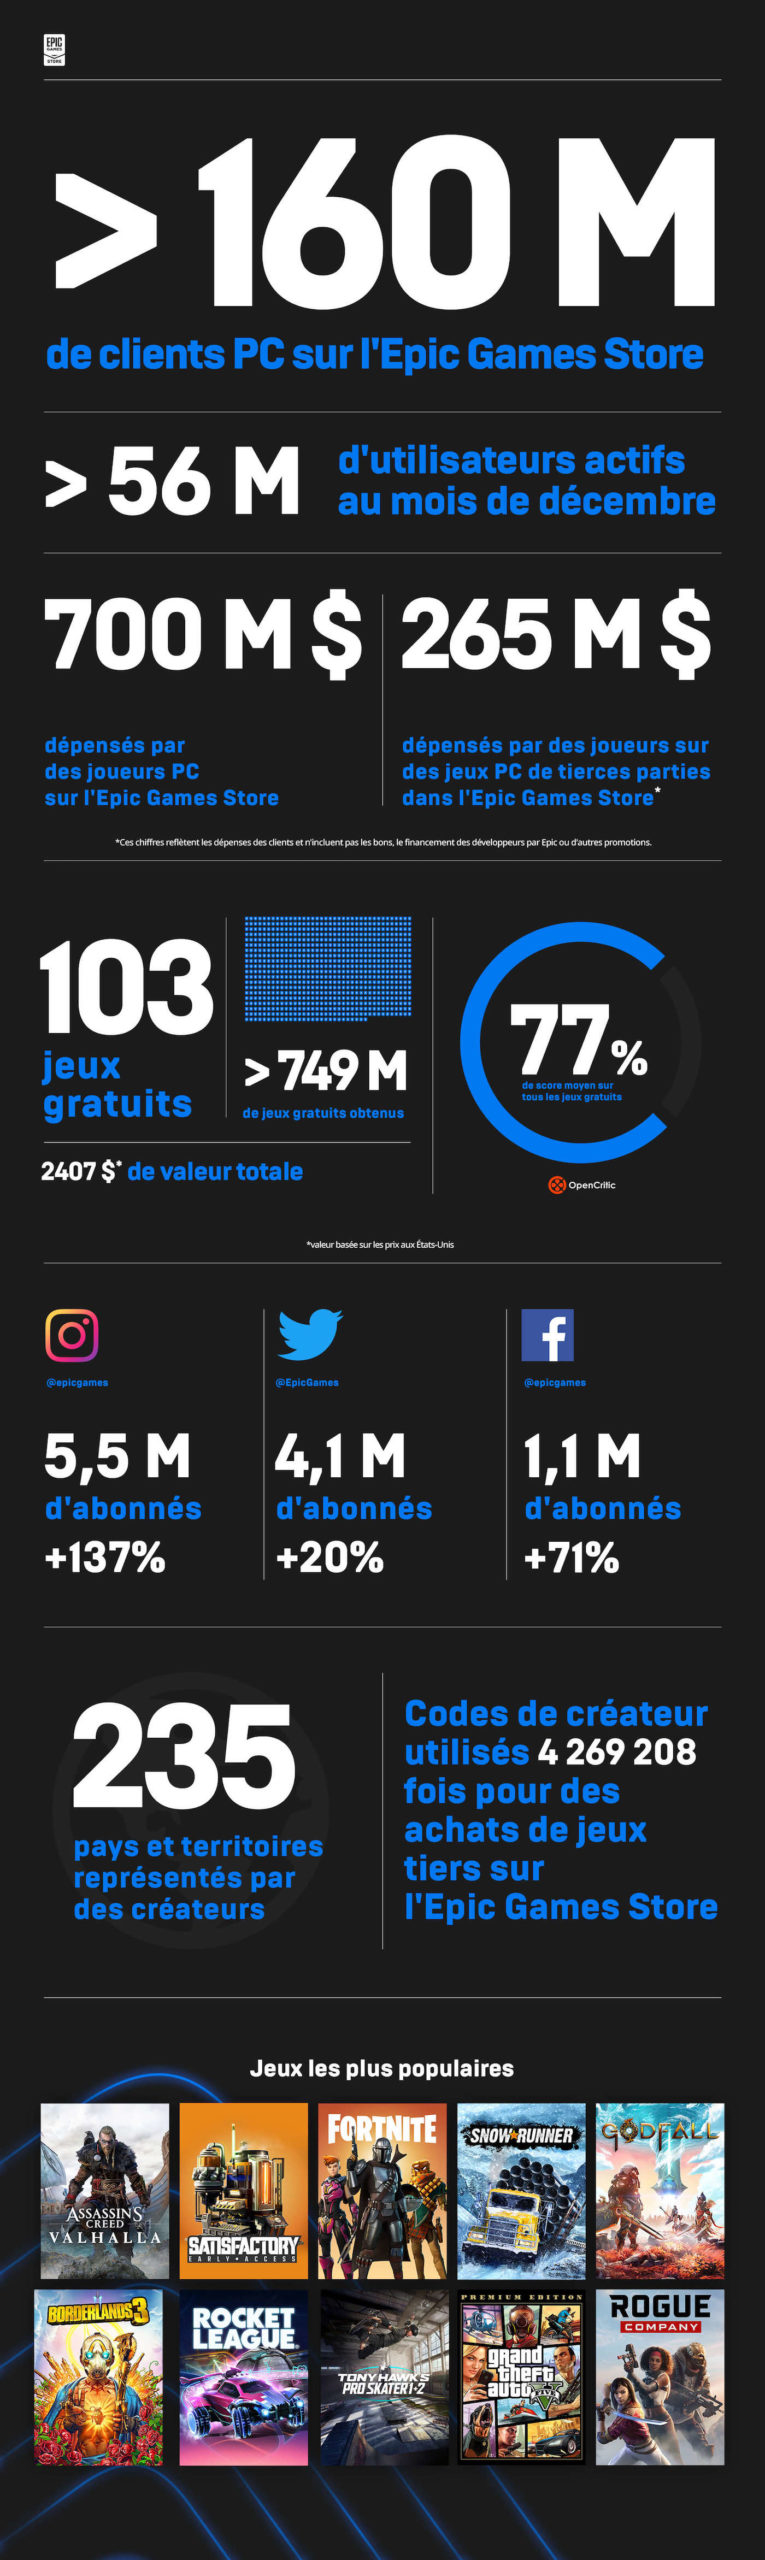 Infographie Donnes Epic Games Store 2020